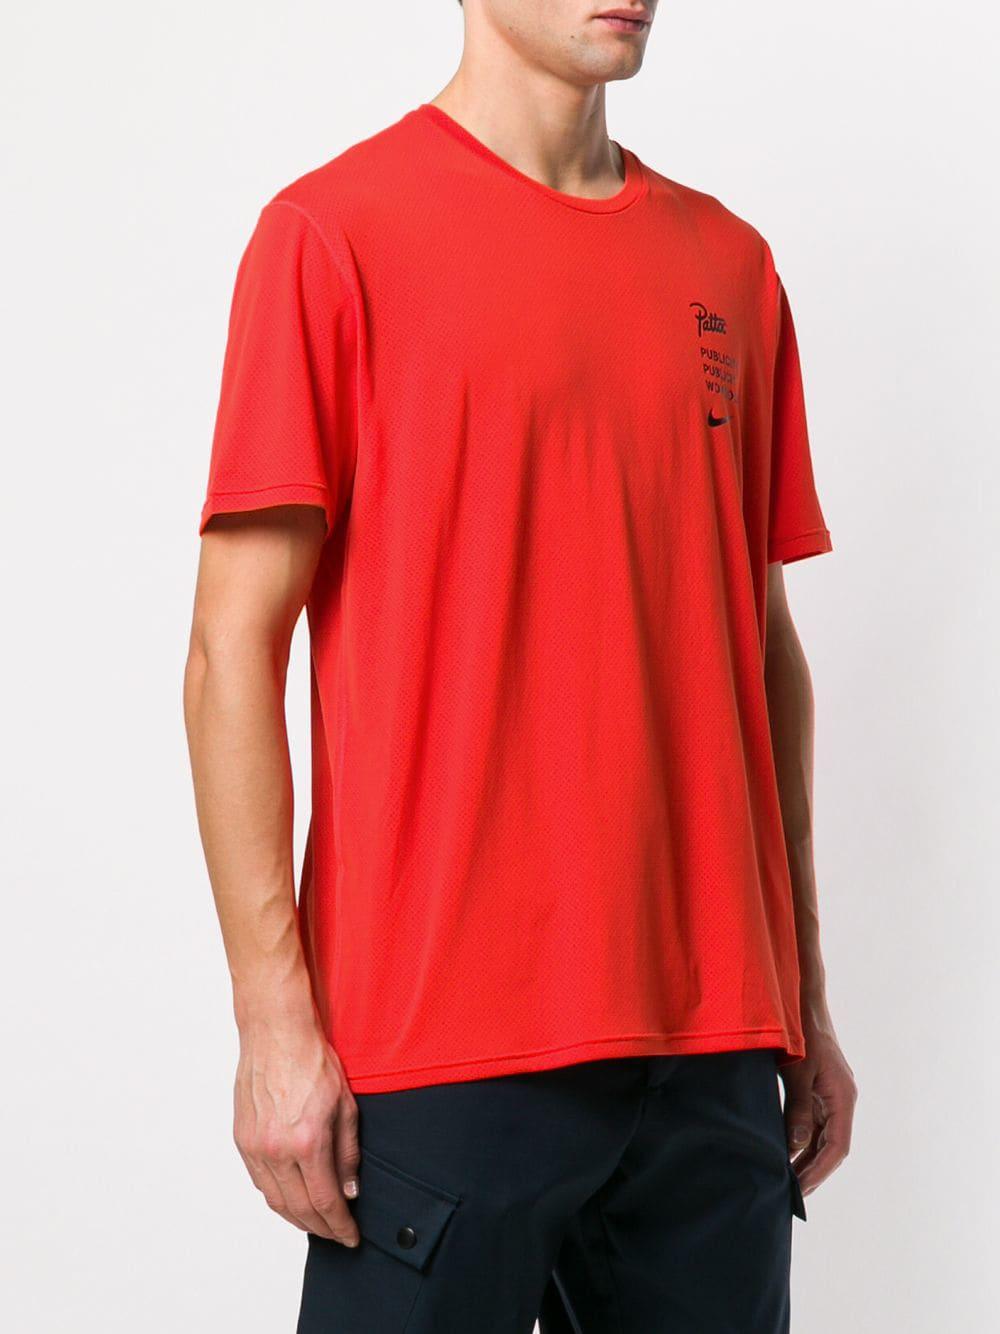 Nike Lab X Patta T-shirt in Red for Men | Lyst